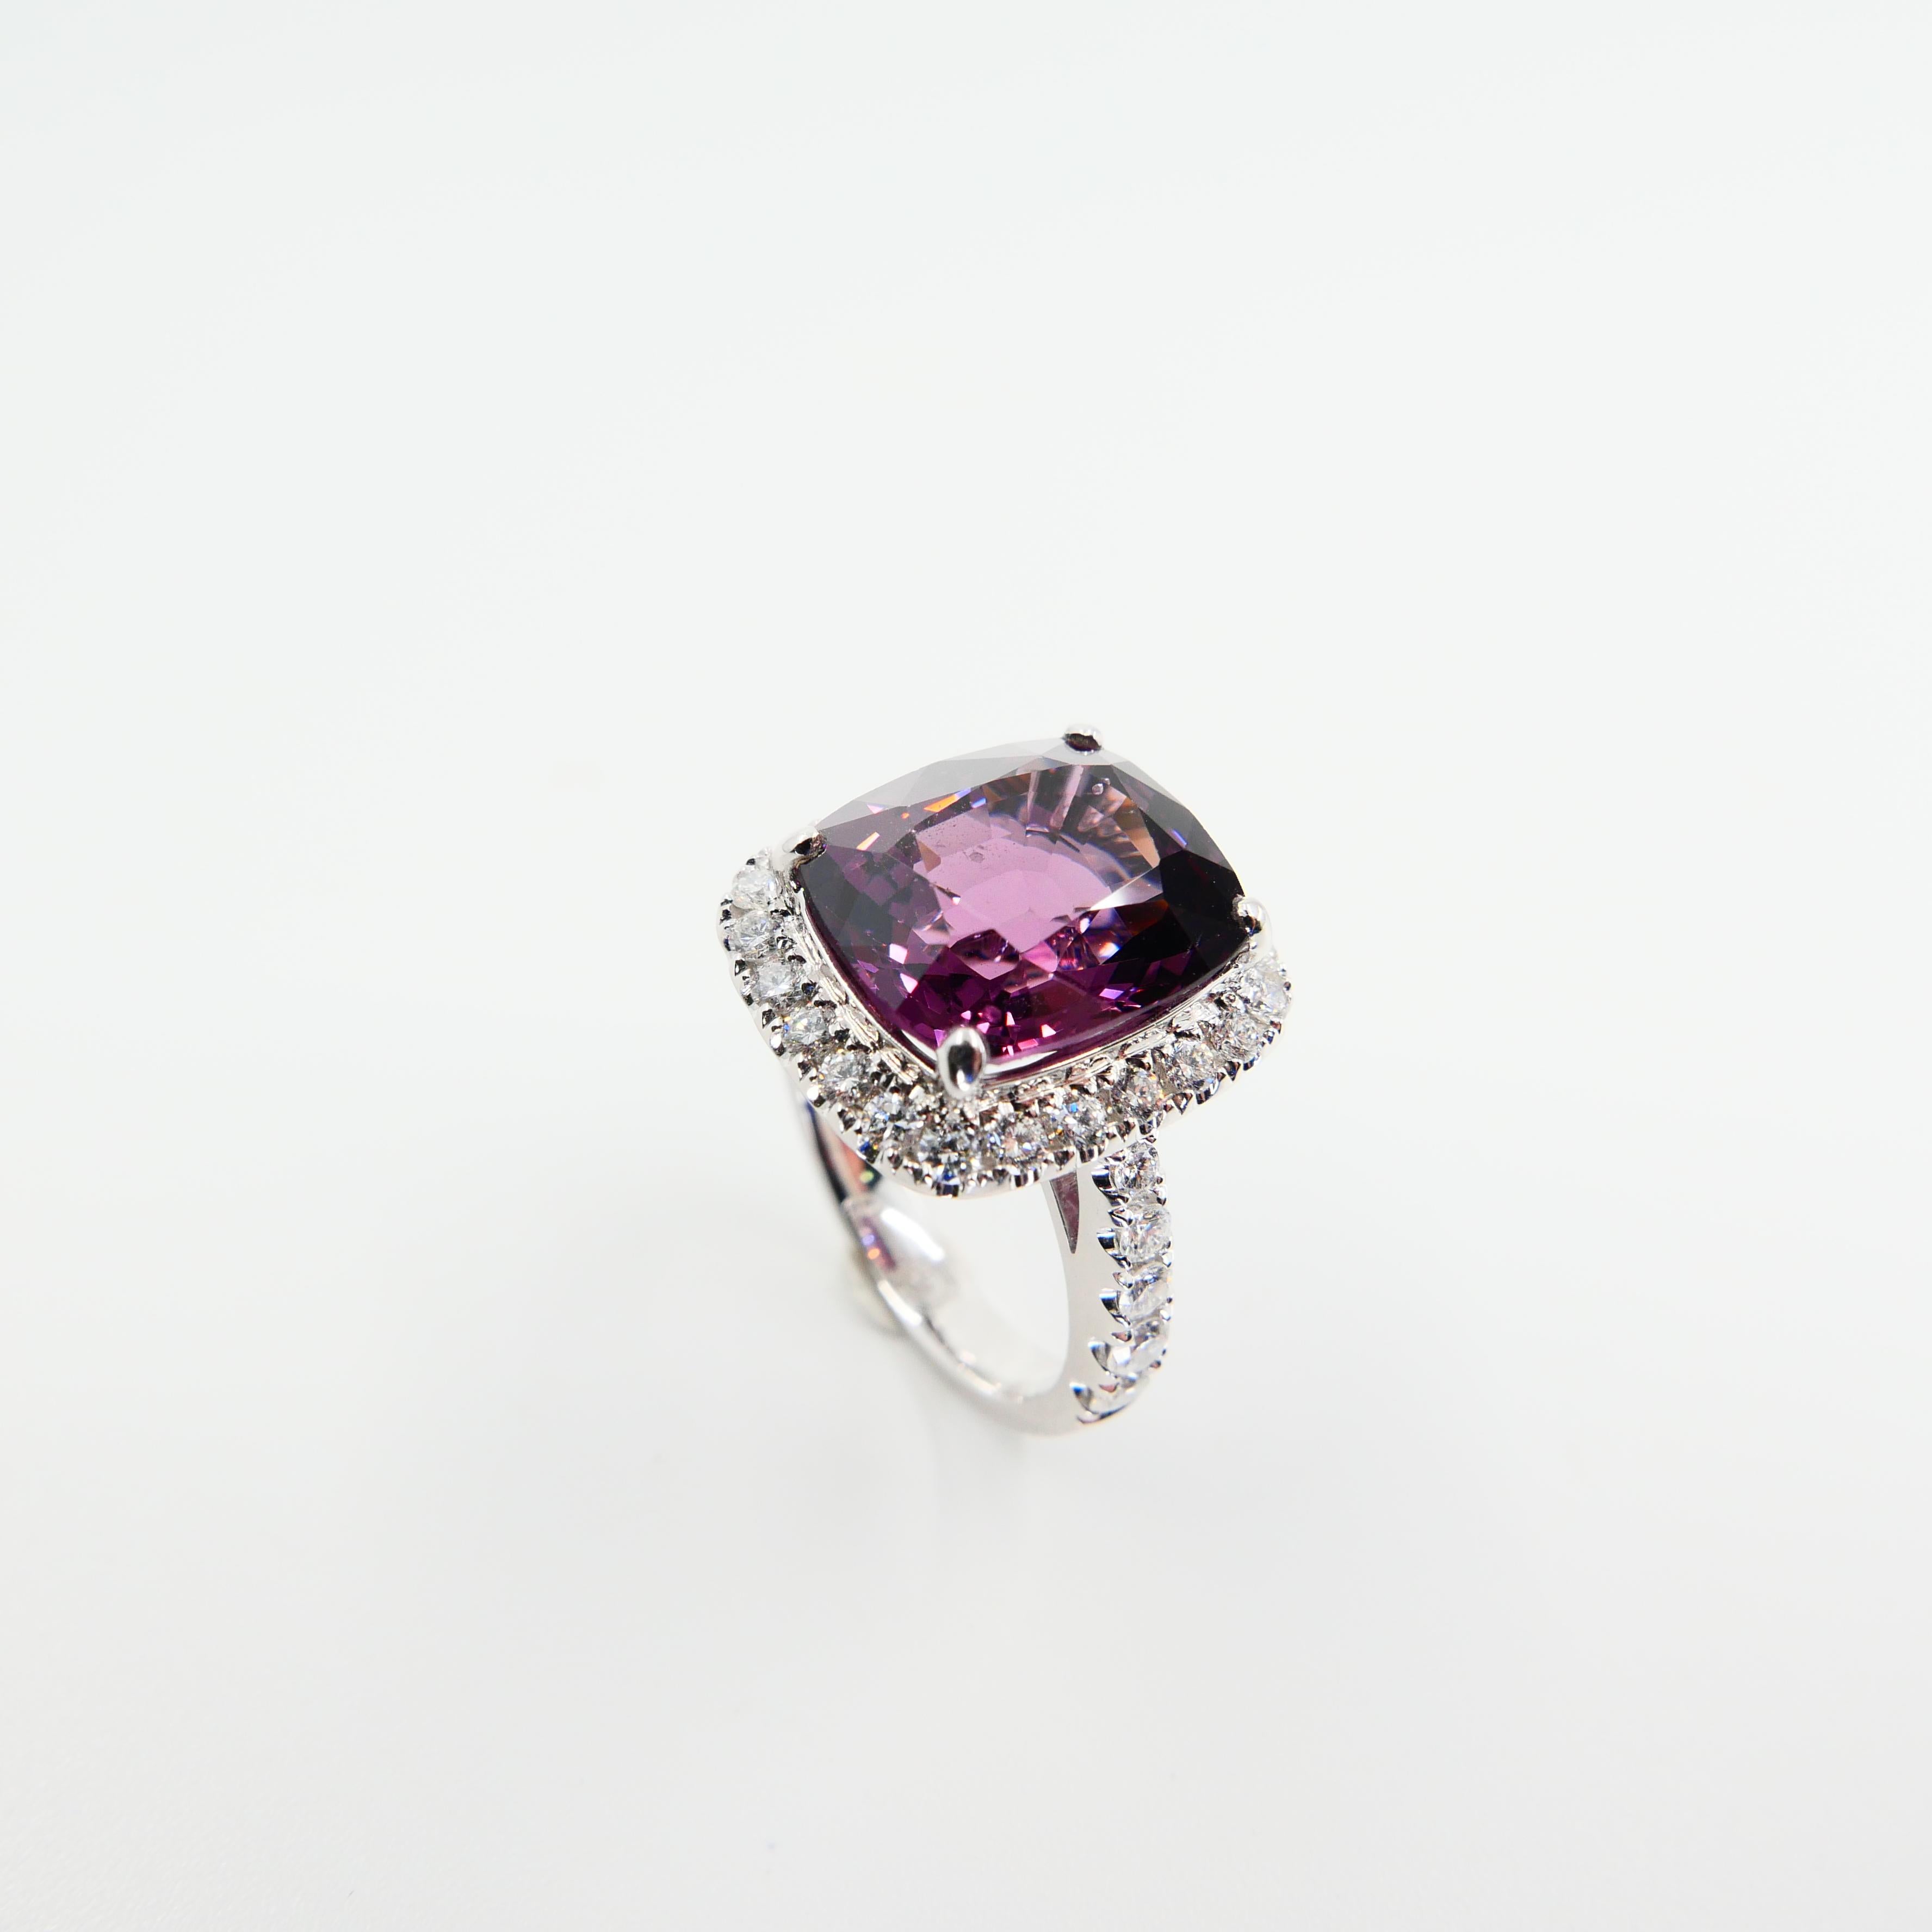 Certified Natural 9.18 Carat Vivid Purple No Heat Spinel & Diamond Cocktail Ring For Sale 1